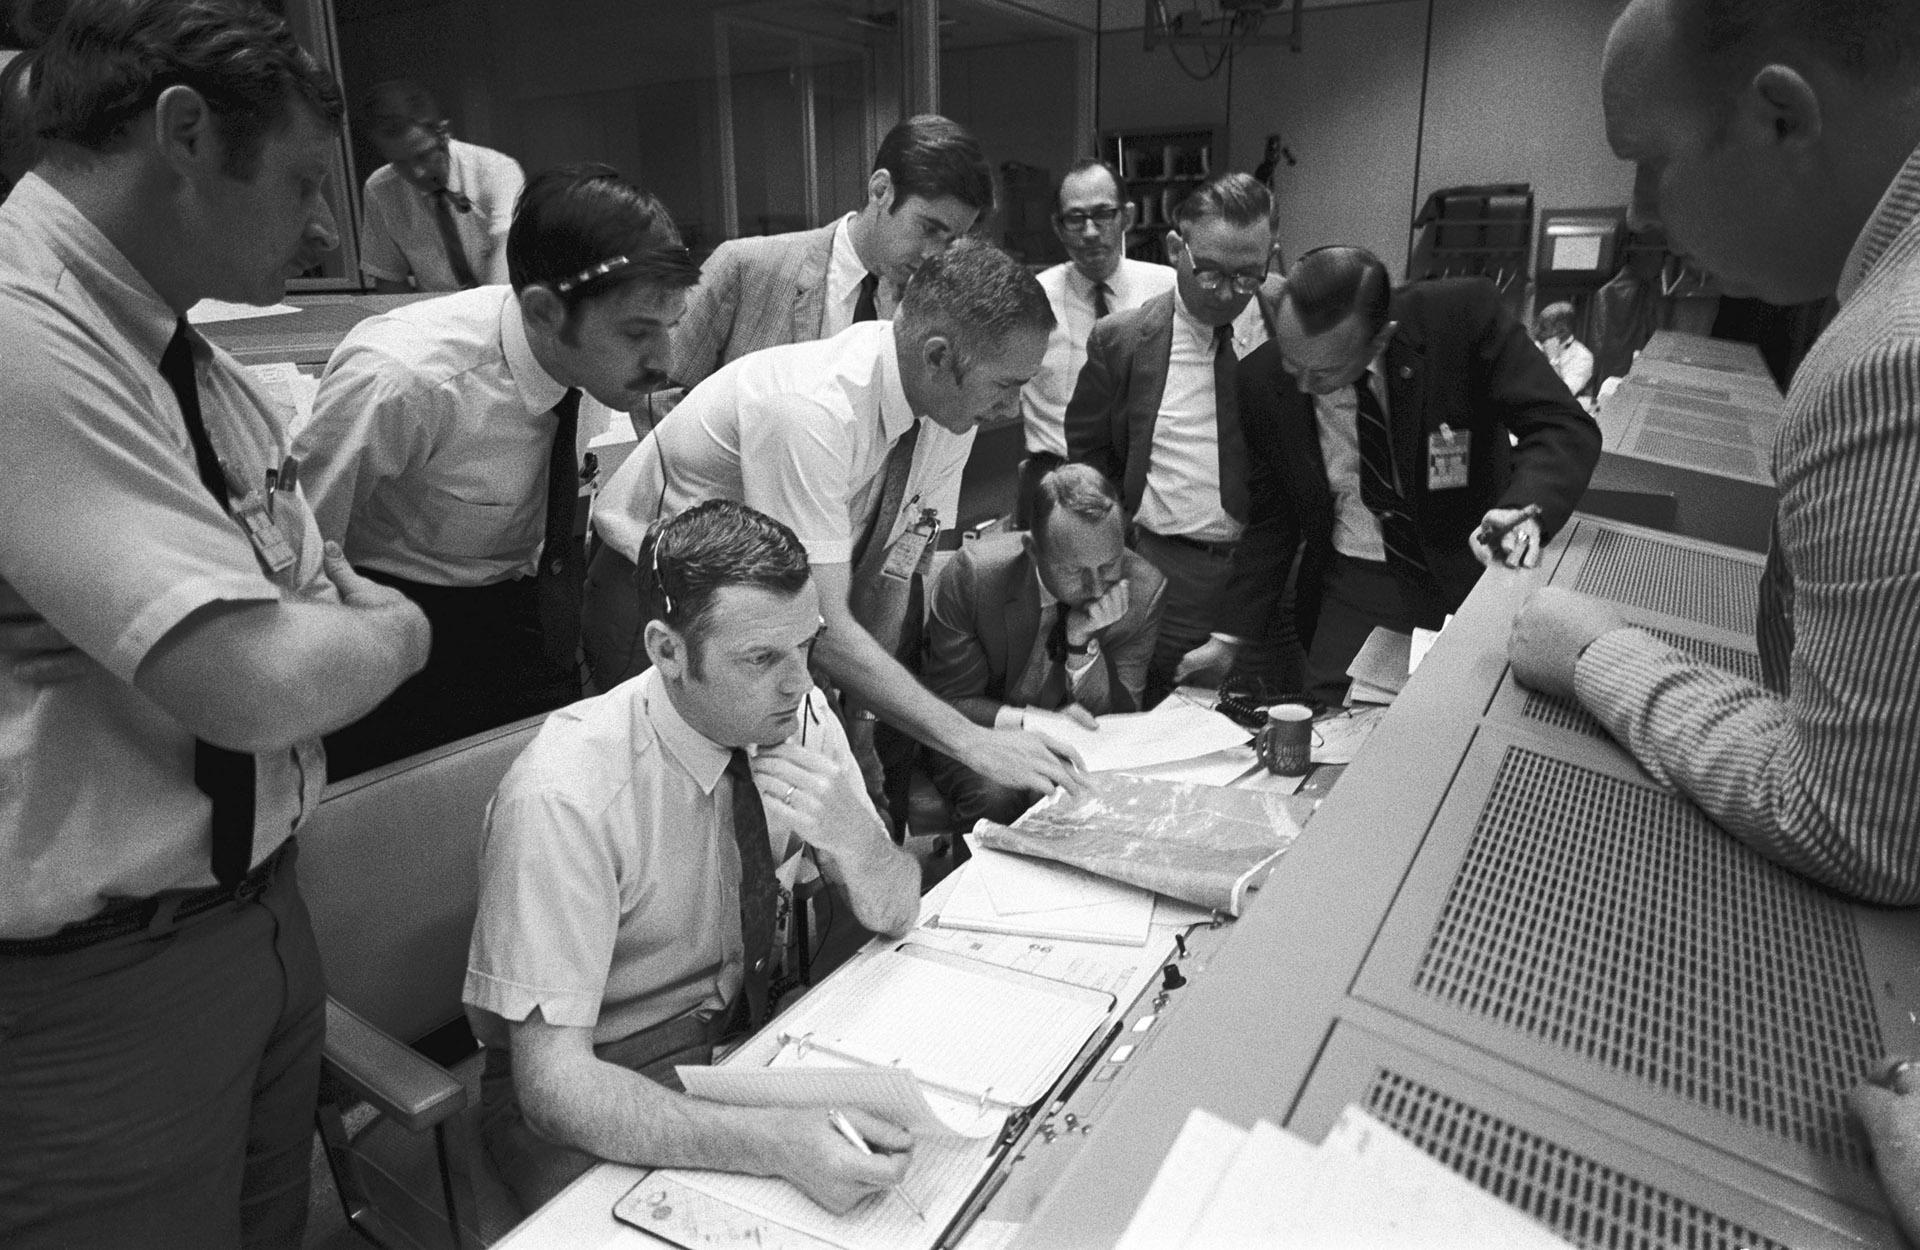 In this April 15, 1970 photo made available by NASA, a group of flight controllers gather around the console of Glenn S. Lunney, foreground seated, Shift 4 flight director, in the Mission Operations Control Room of Mission Control Center in Houston. Their attention is drawn to a weather map of the proposed landing site in the Pacific Ocean. At this point, the Apollo 13 lunar landing mission had been canceled, and the problem-plagued Apollo 13 crew members were in trans-Earth trajectory attempting to bring t